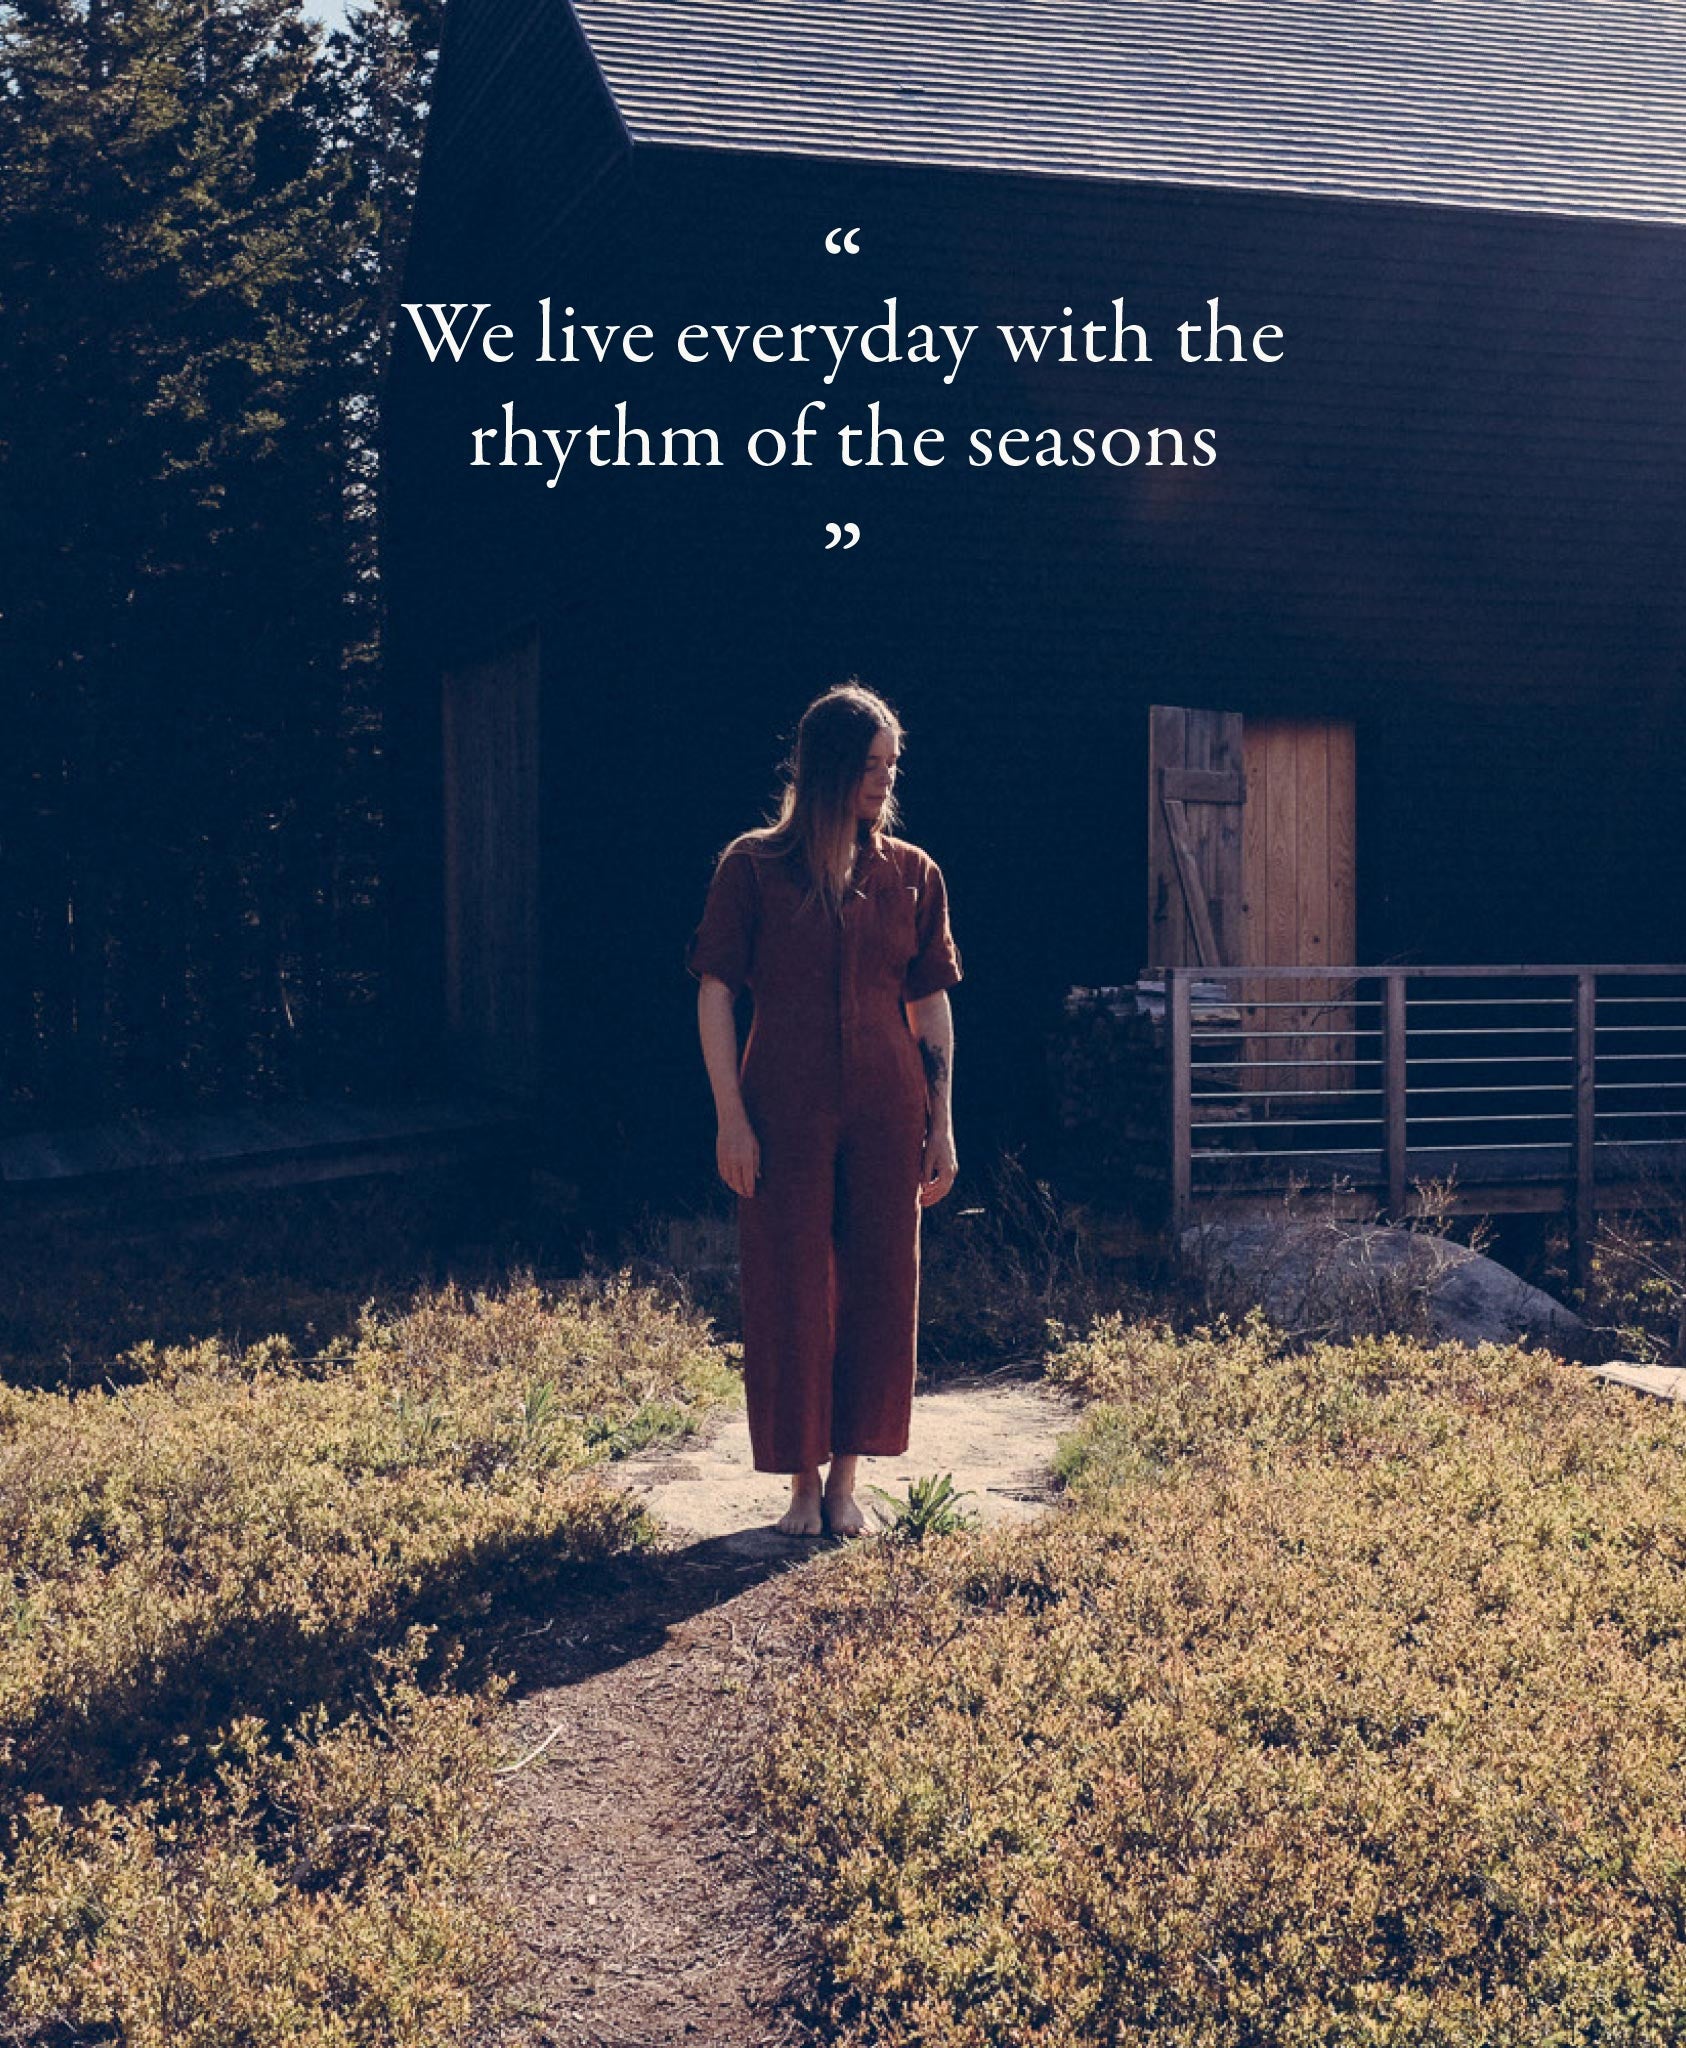 We live everyday with the rhythm of the seasons